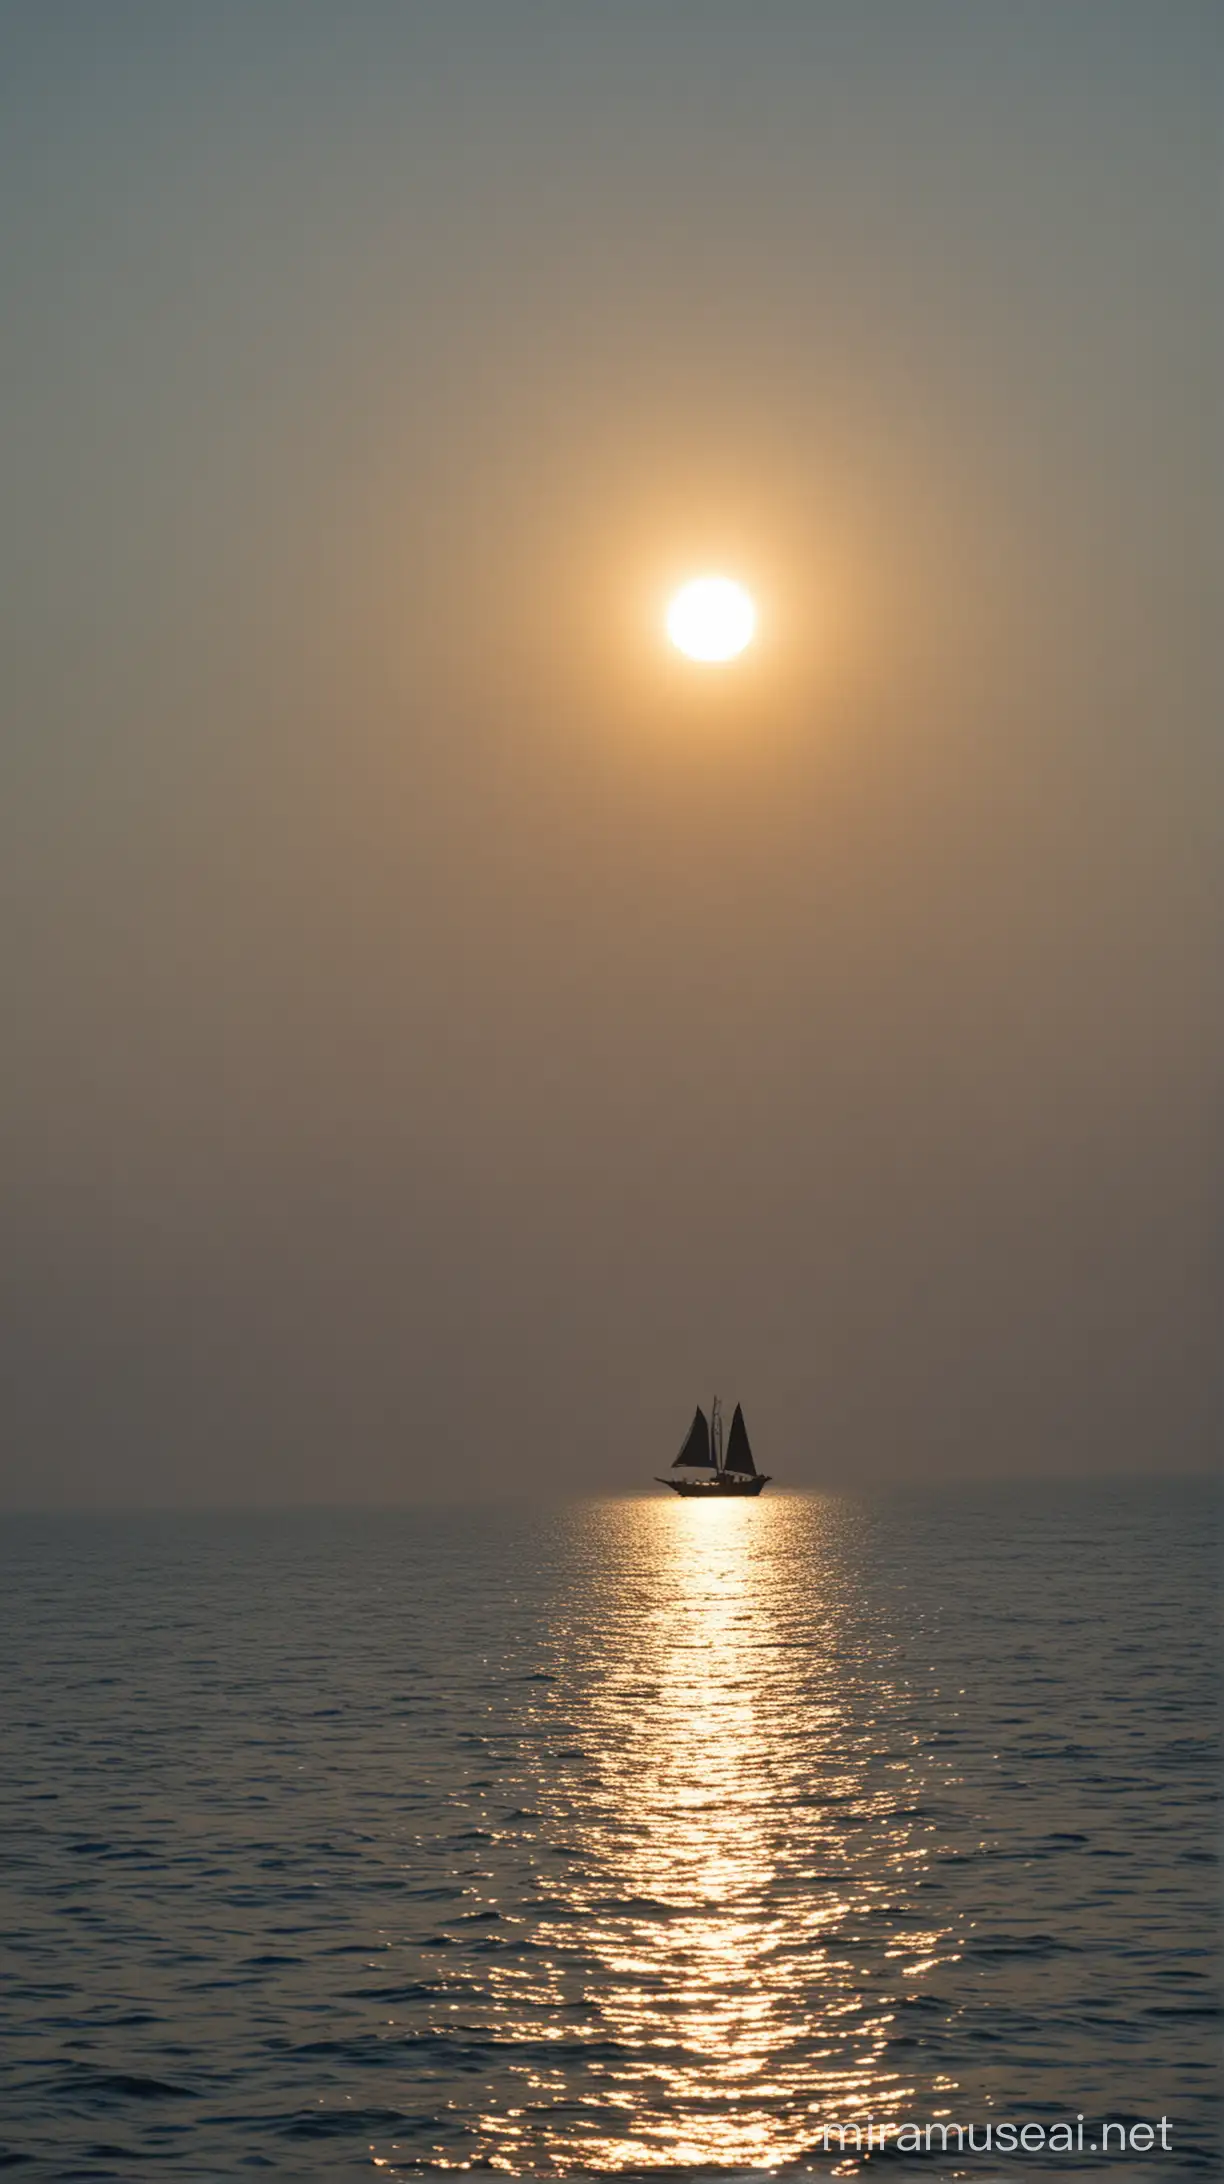 On the blue expanse of the sea, the silhouette of a distant boat emerges. As the light of the sunset envelops the boat, a few members of the Moken tribe quietly continue their journey.
